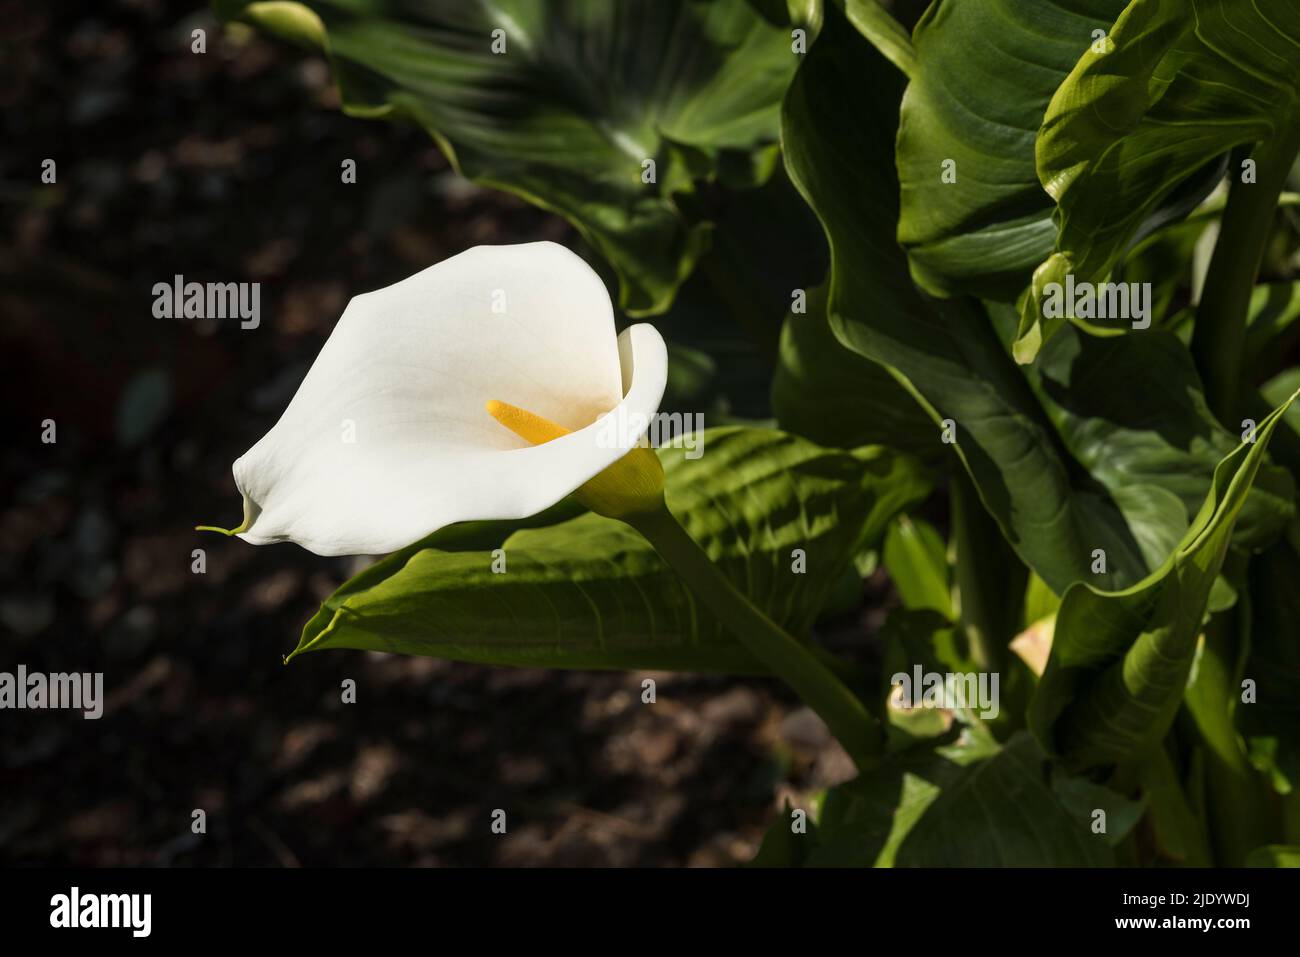 Close up of the beautiful shape of a white Arum Lily - Zantedeschia Aethiopica. Flowers May - June in humus rich soil. Stock Photo